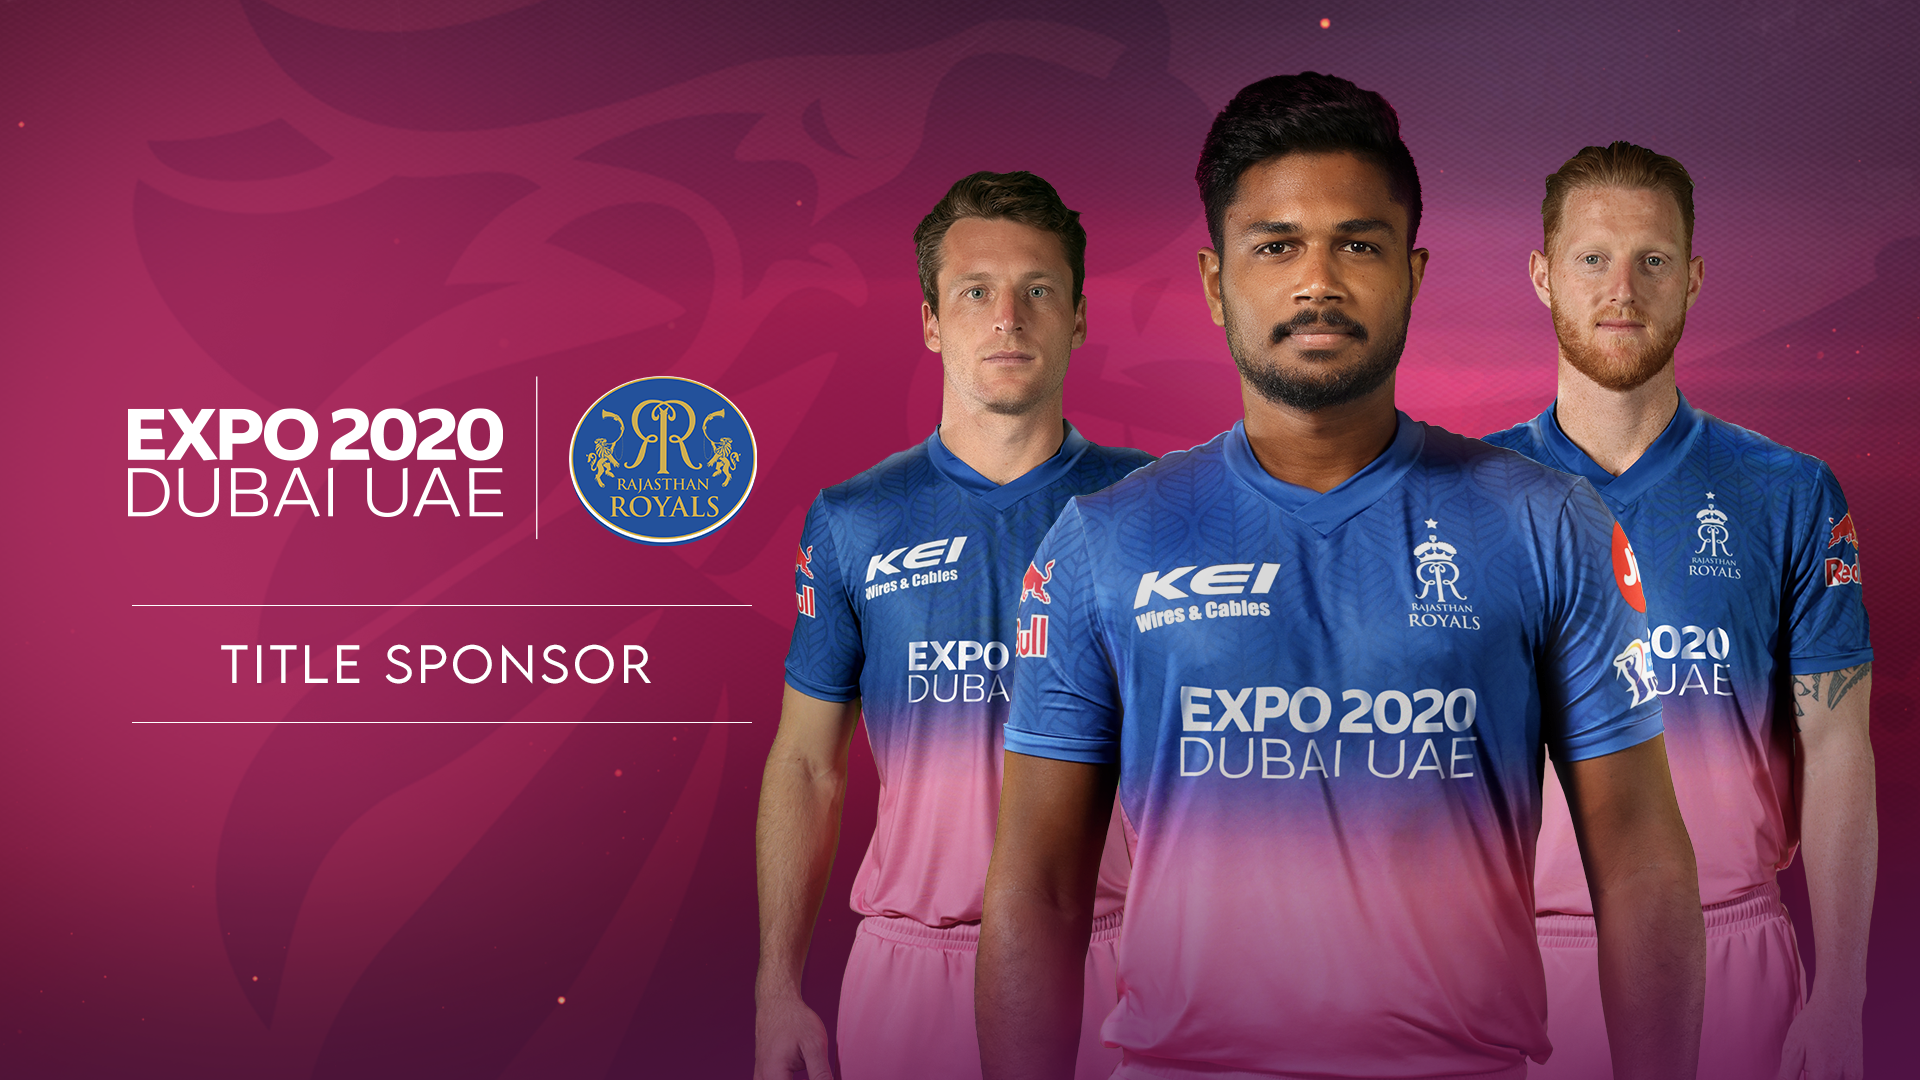 rajasthan royals launches new jersey for 2021 season